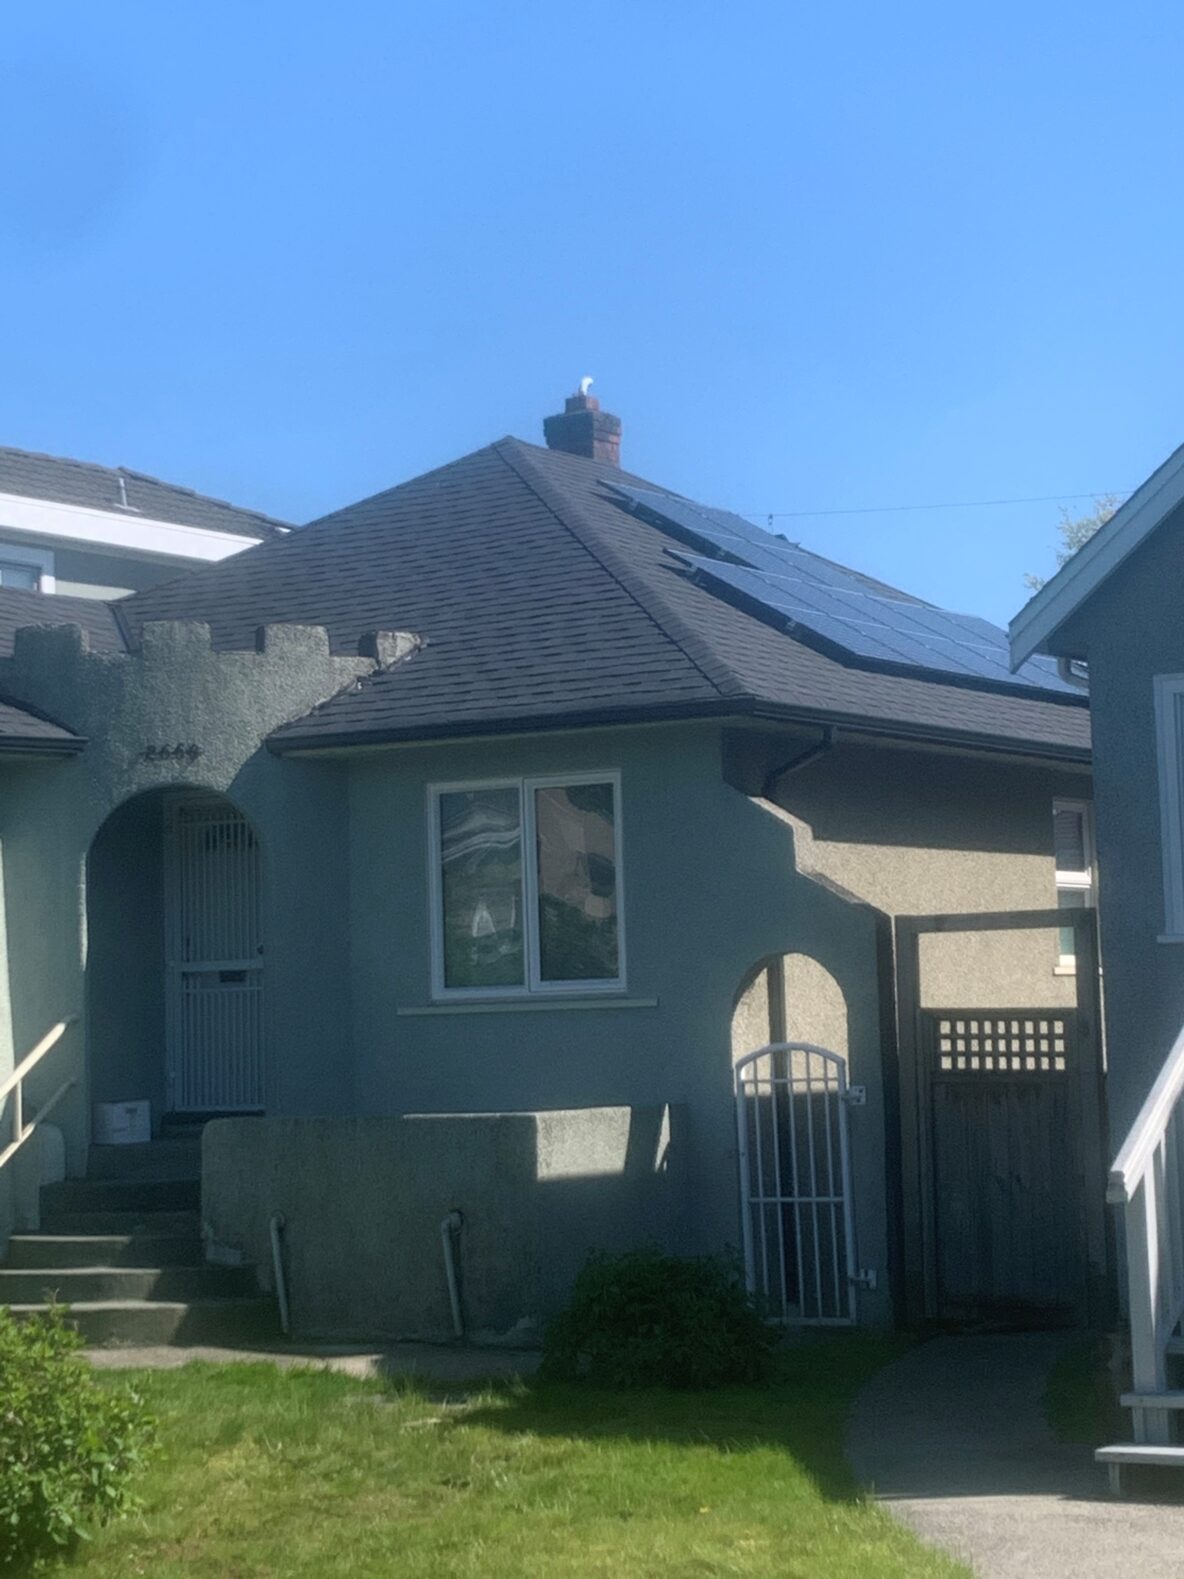 A Vancouver house with a 7.5 kW solar panel system